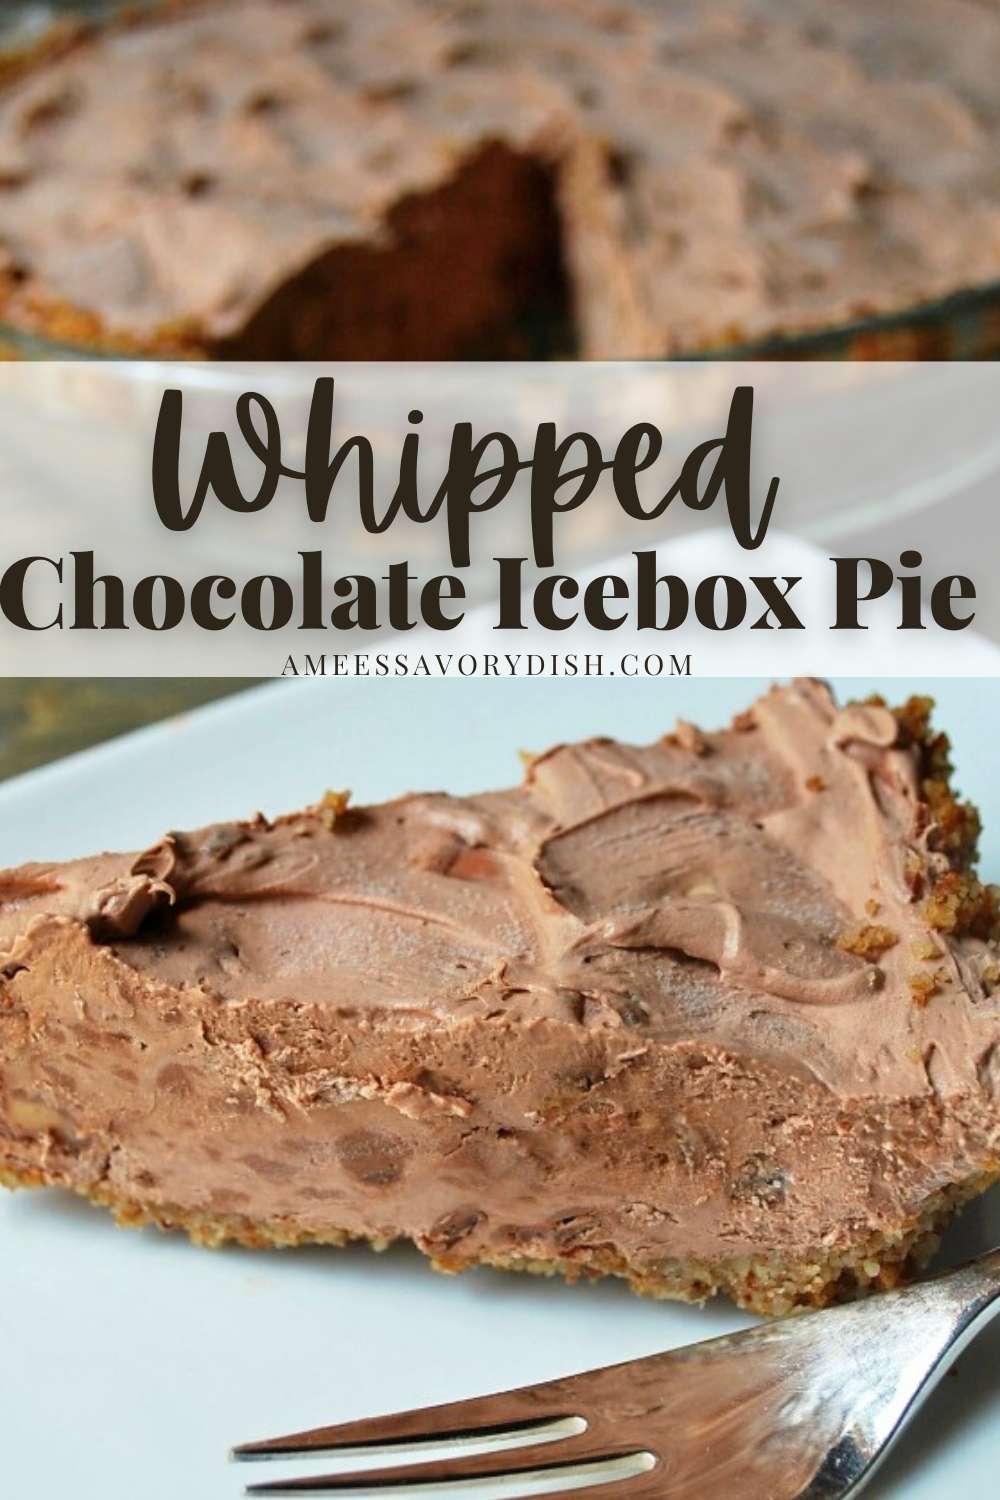 A tasty recipe for whipped chocolate icebox pie with pecan pie crust made with no flour or added sugar and chilled for a perfect summertime dessert. #iceboxpie #glutenfreepie #pecanpiecrust via @Ameessavorydish